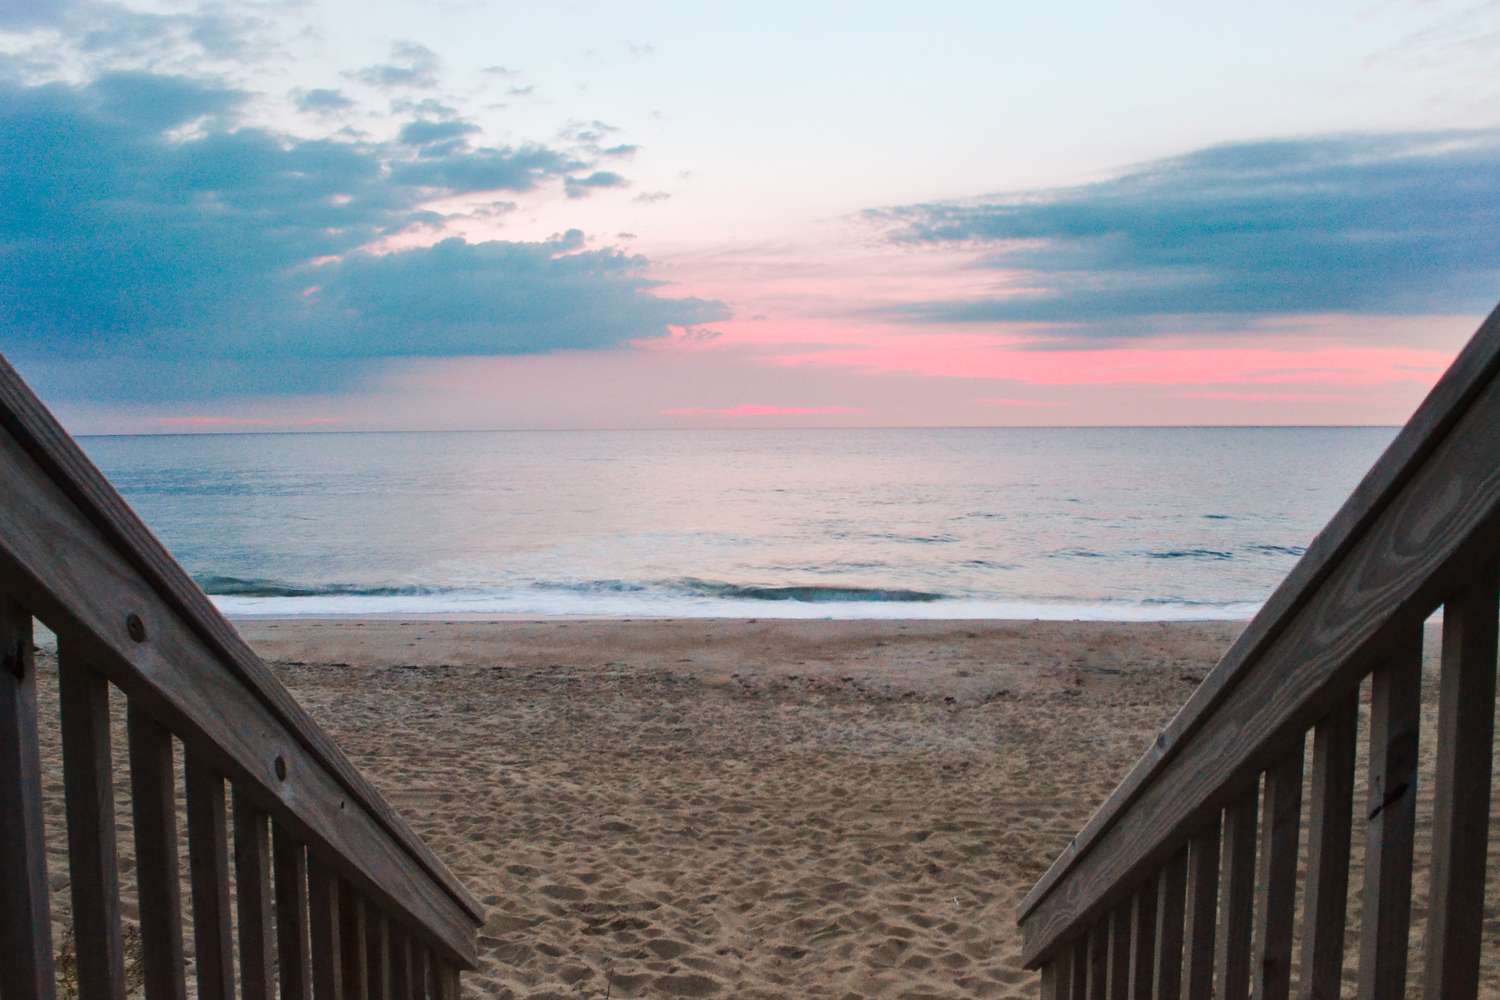 Wood railings on each side facing toward beach with blue and pink sunrise